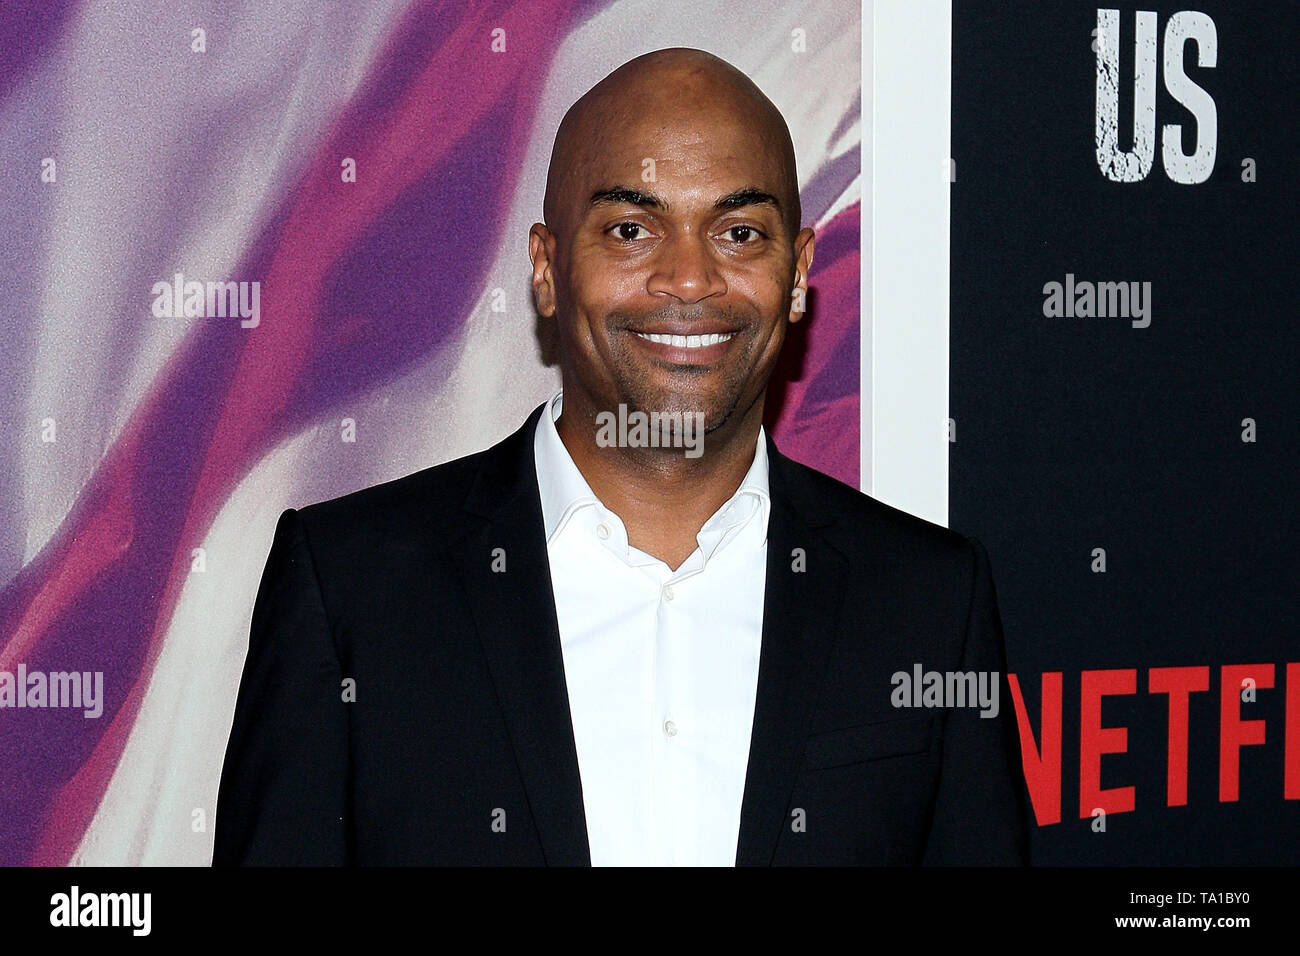 New York, USA. 20 May, 2019. Andrew Stewart-Jones at the World Premiere of 'When They See Us' at The Apollo Theater. Credit: Steve Mack/Alamy Live News Stock Photo